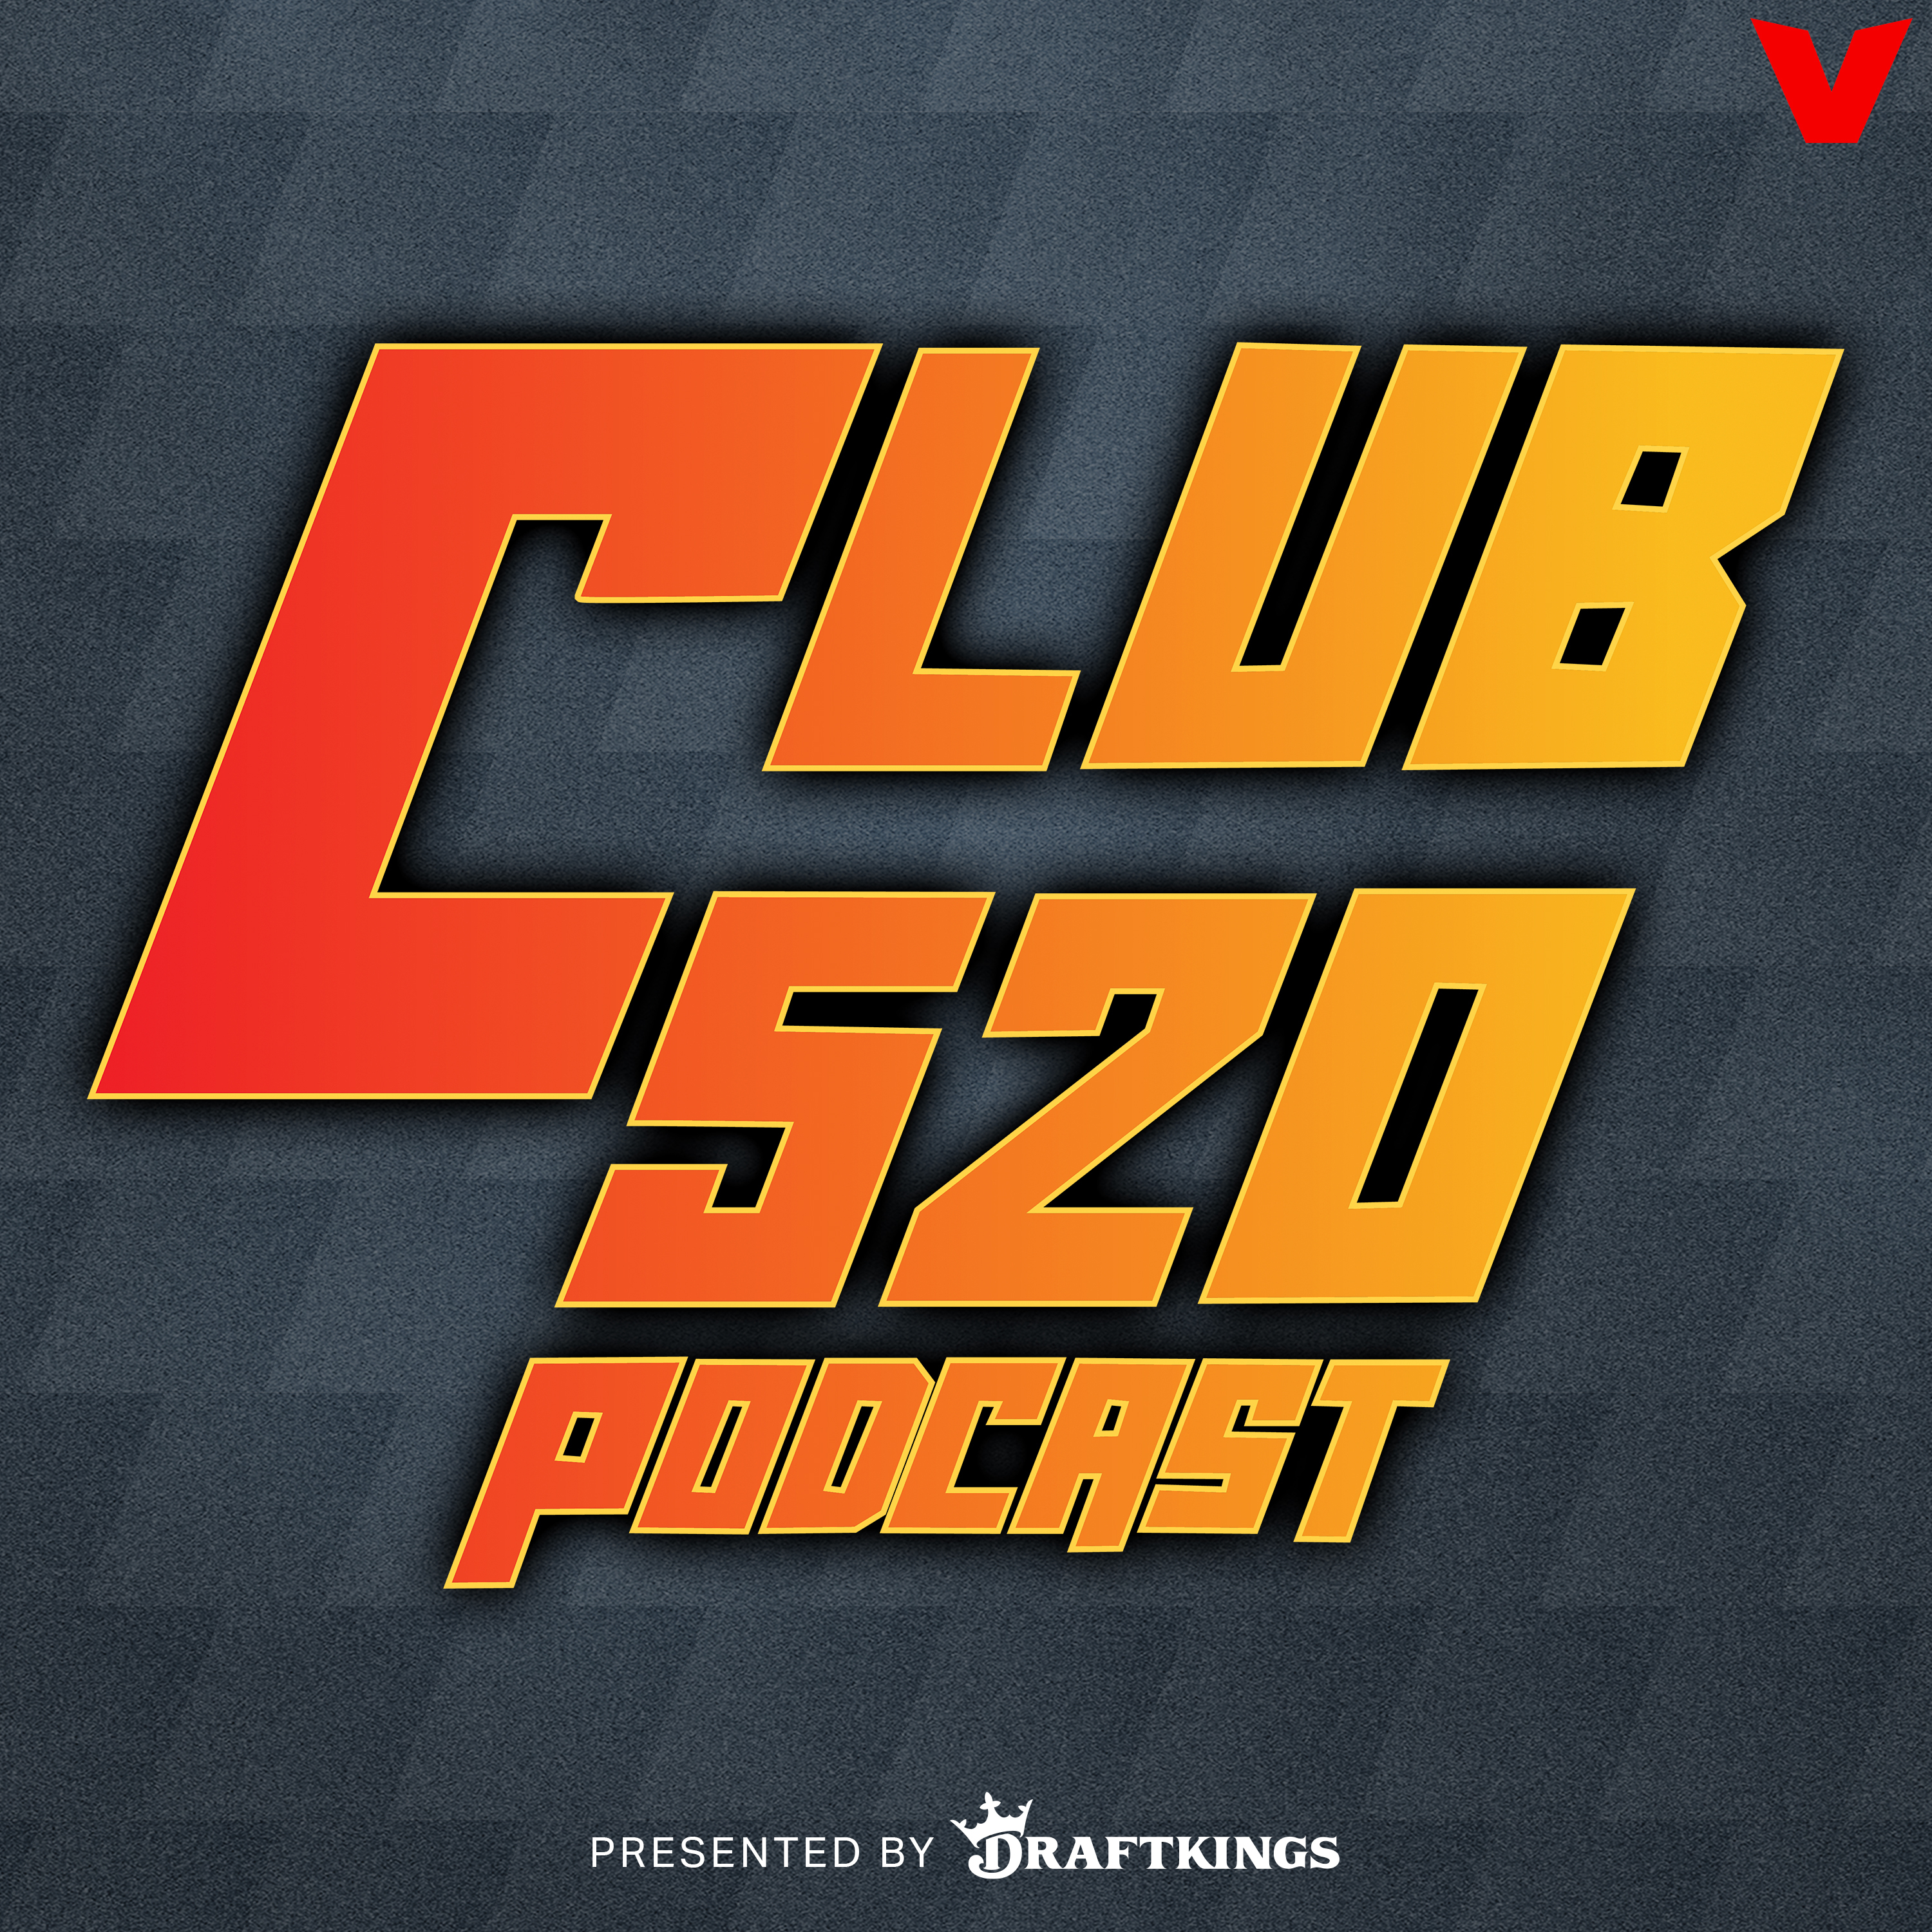 Club 520 - Jeff Teague reacts to Anthony Edwards abortion story, Draymond Green counseling by iHeartPodcasts and The Volume